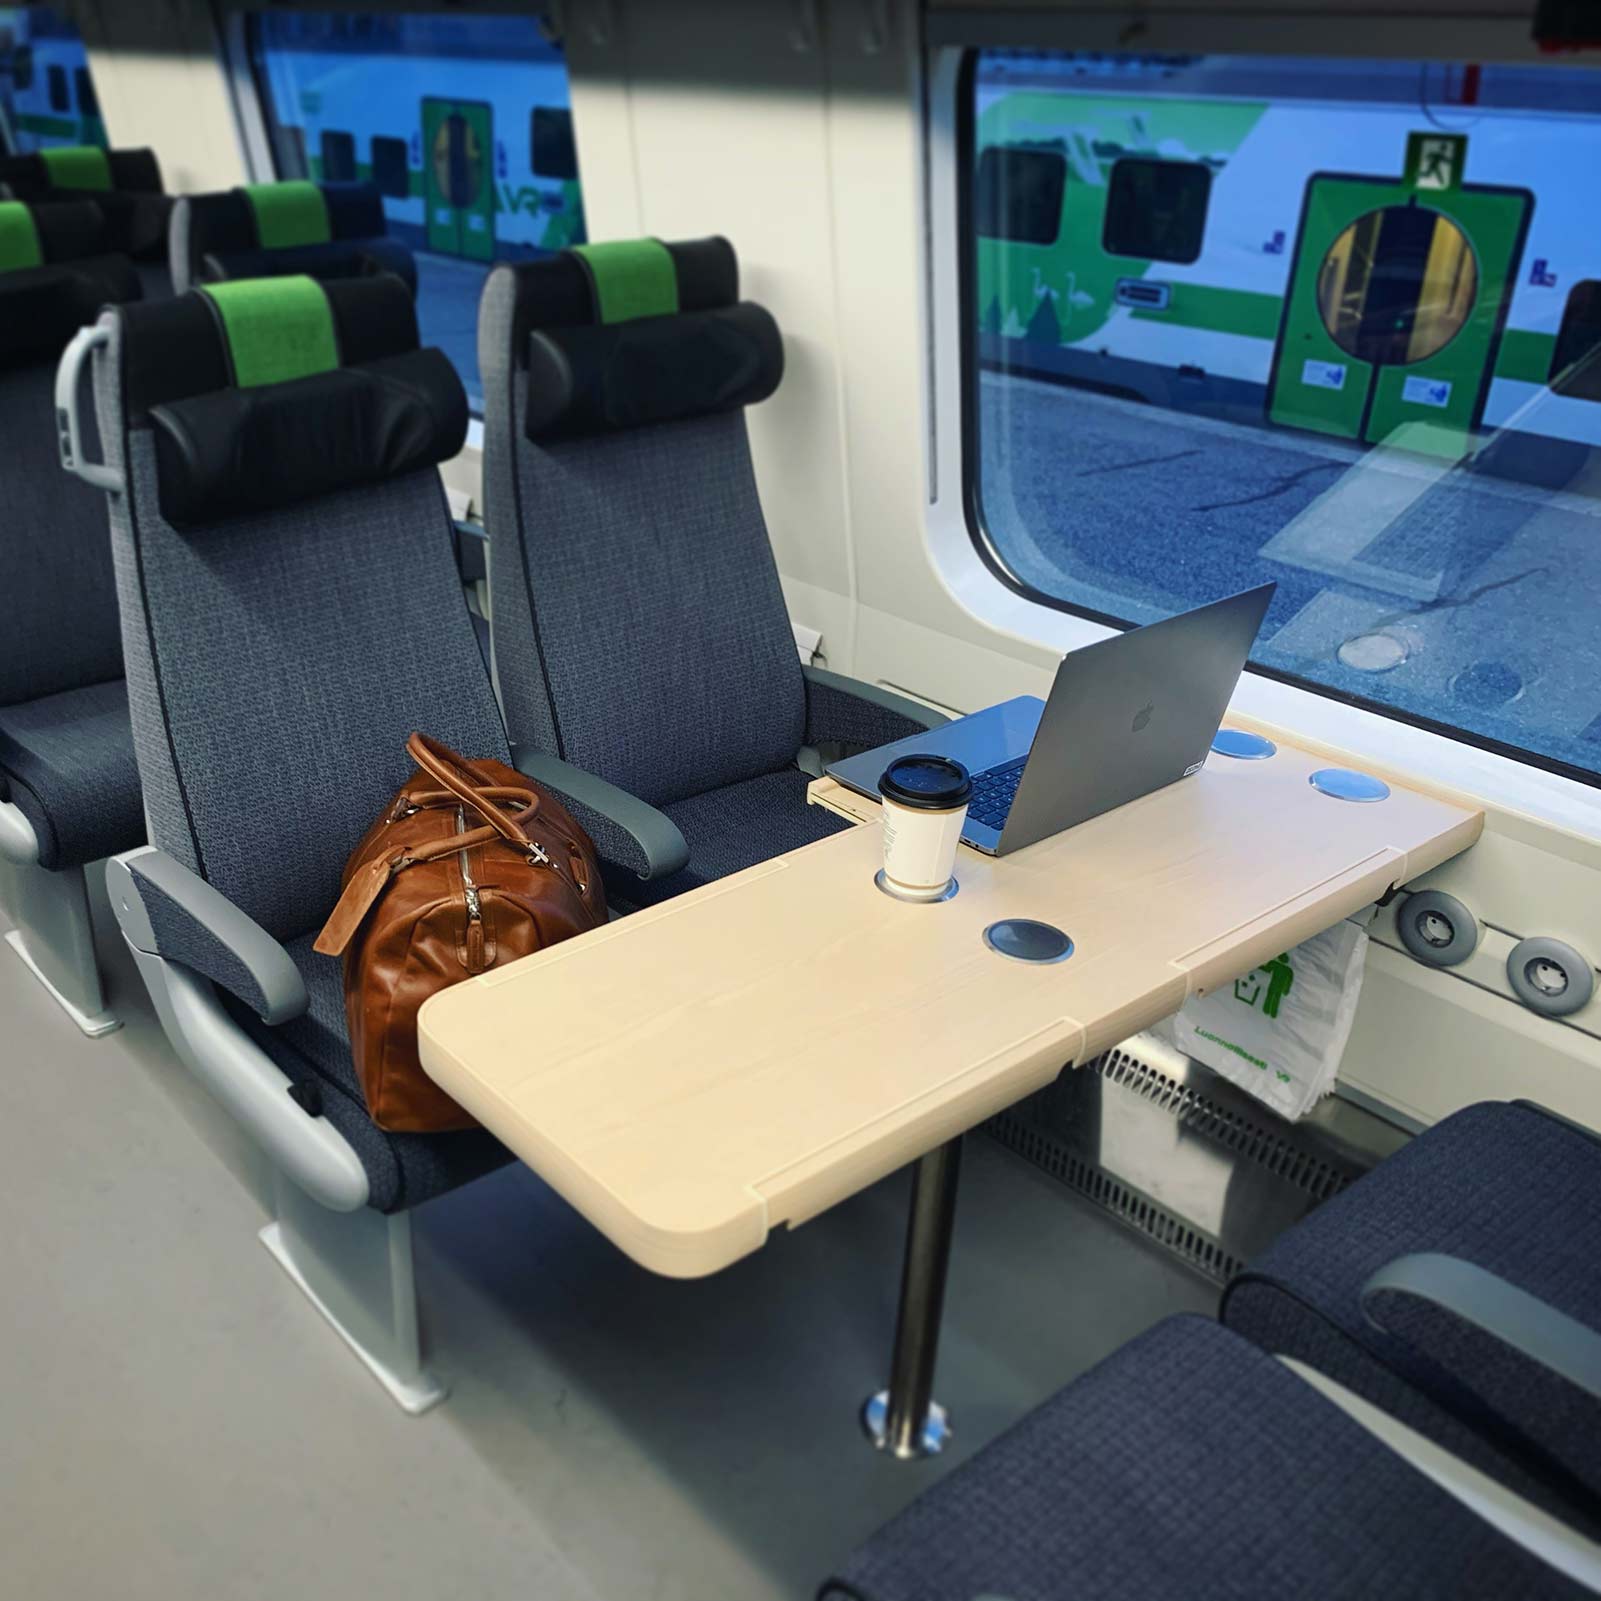 Photo from a train with a laptop on a table